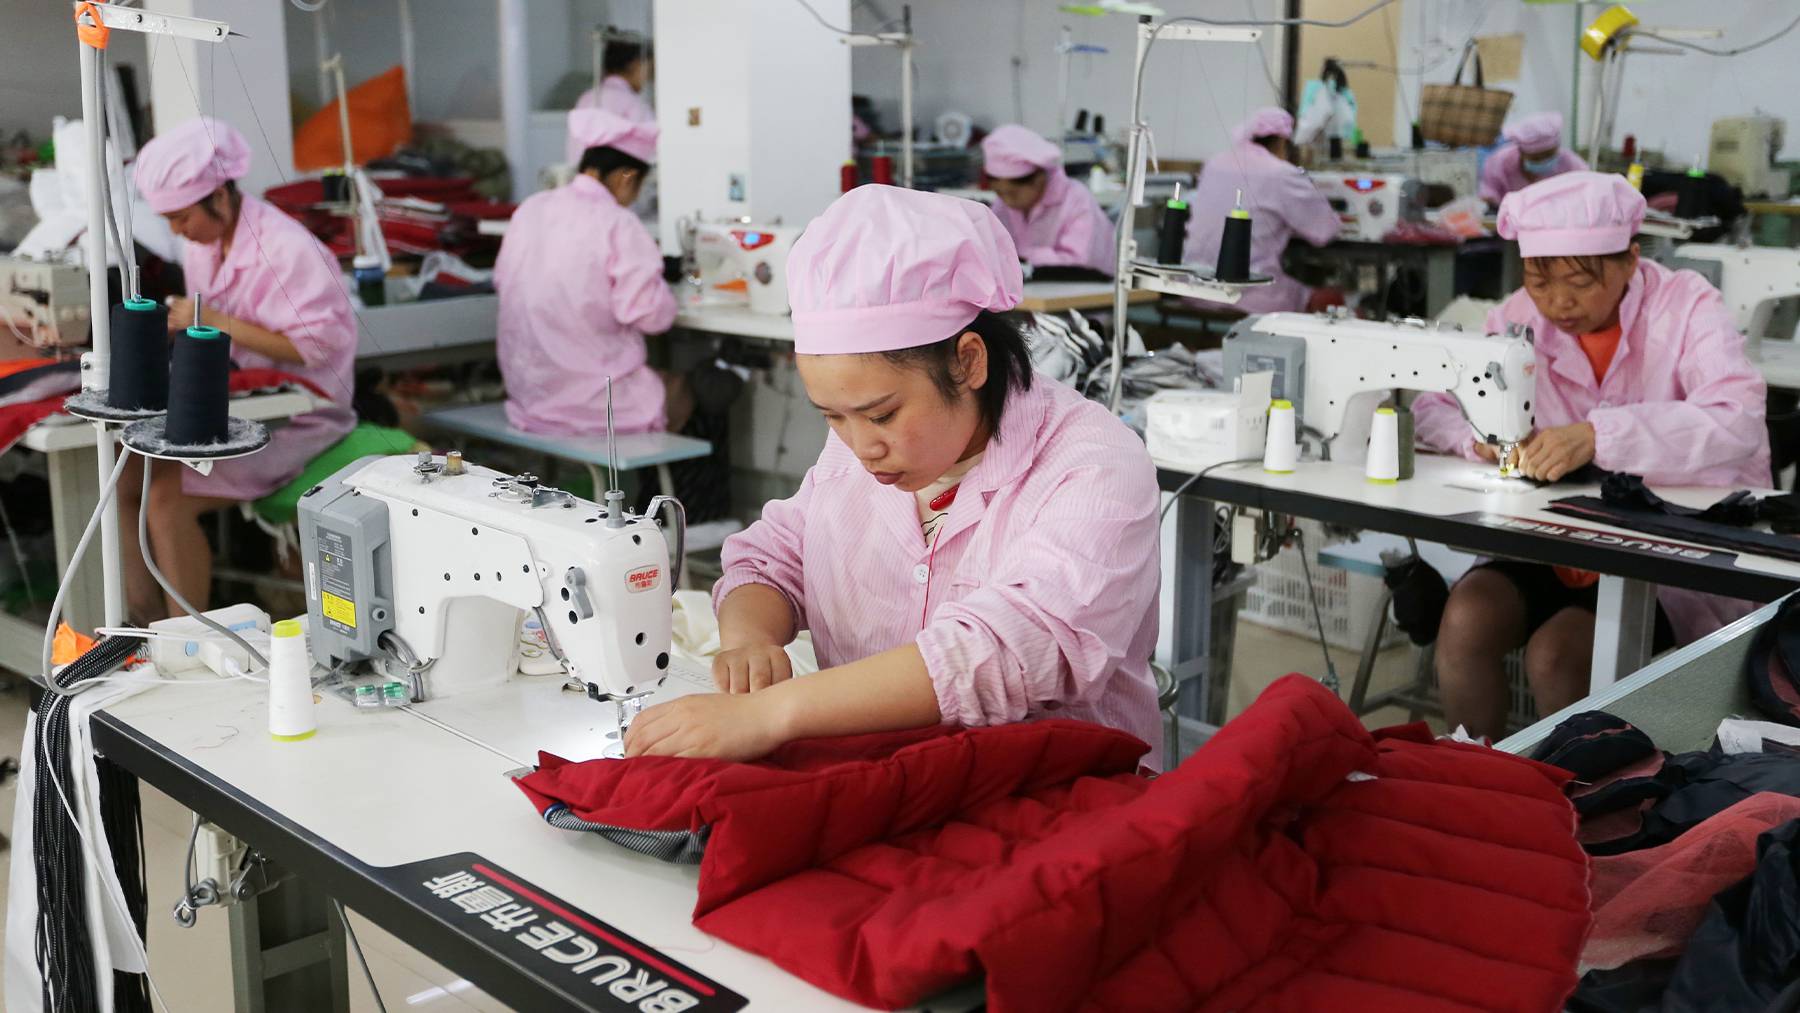 Women work in a garment factory in Suixi county in central China's Anhui province. Getty Images.